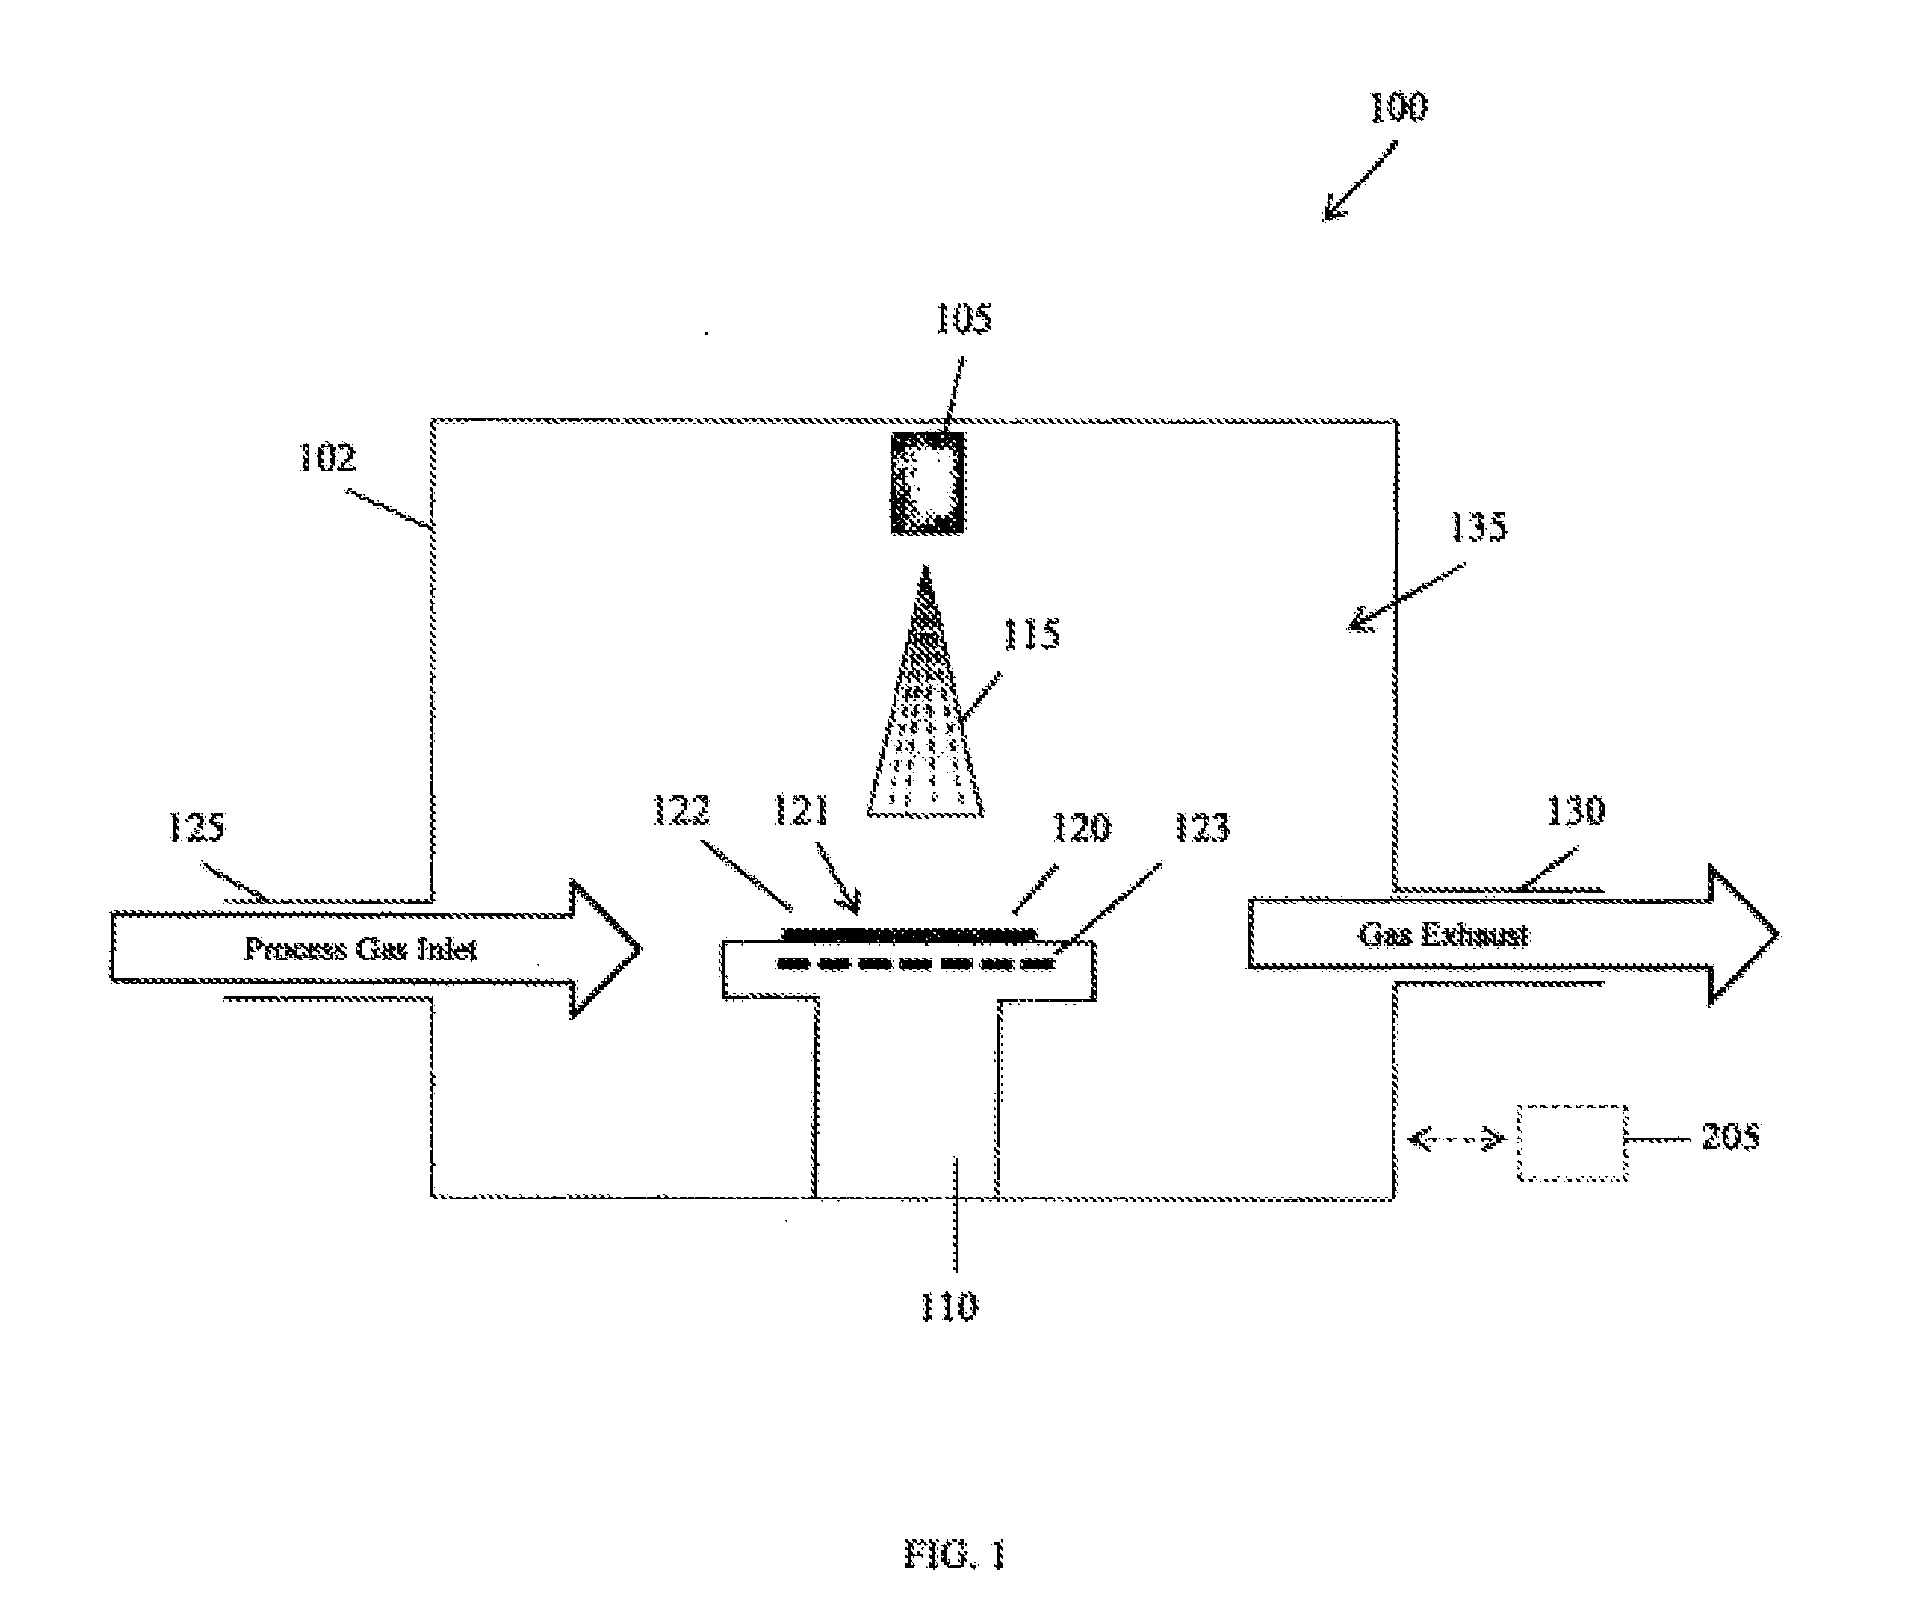 Method of growing aluminum oxide onto substrates by use of an aluminum source in an environment containing partial pressure of oxygen to create transparent, scratch-resistant windows